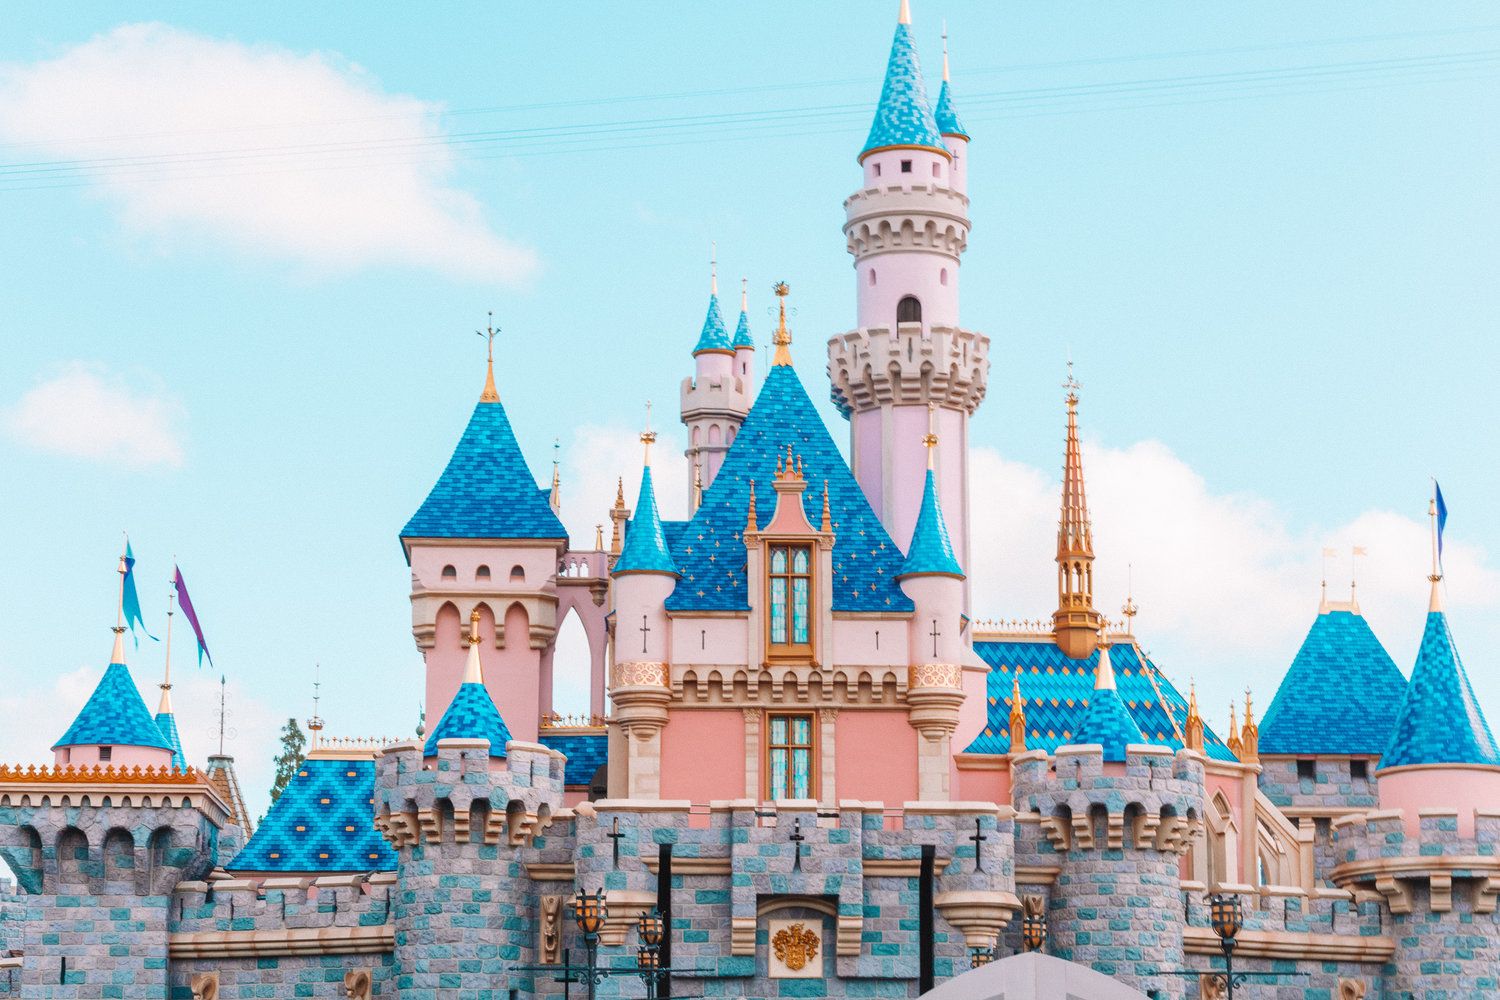 A large castle with blue and pink towers - Disneyland